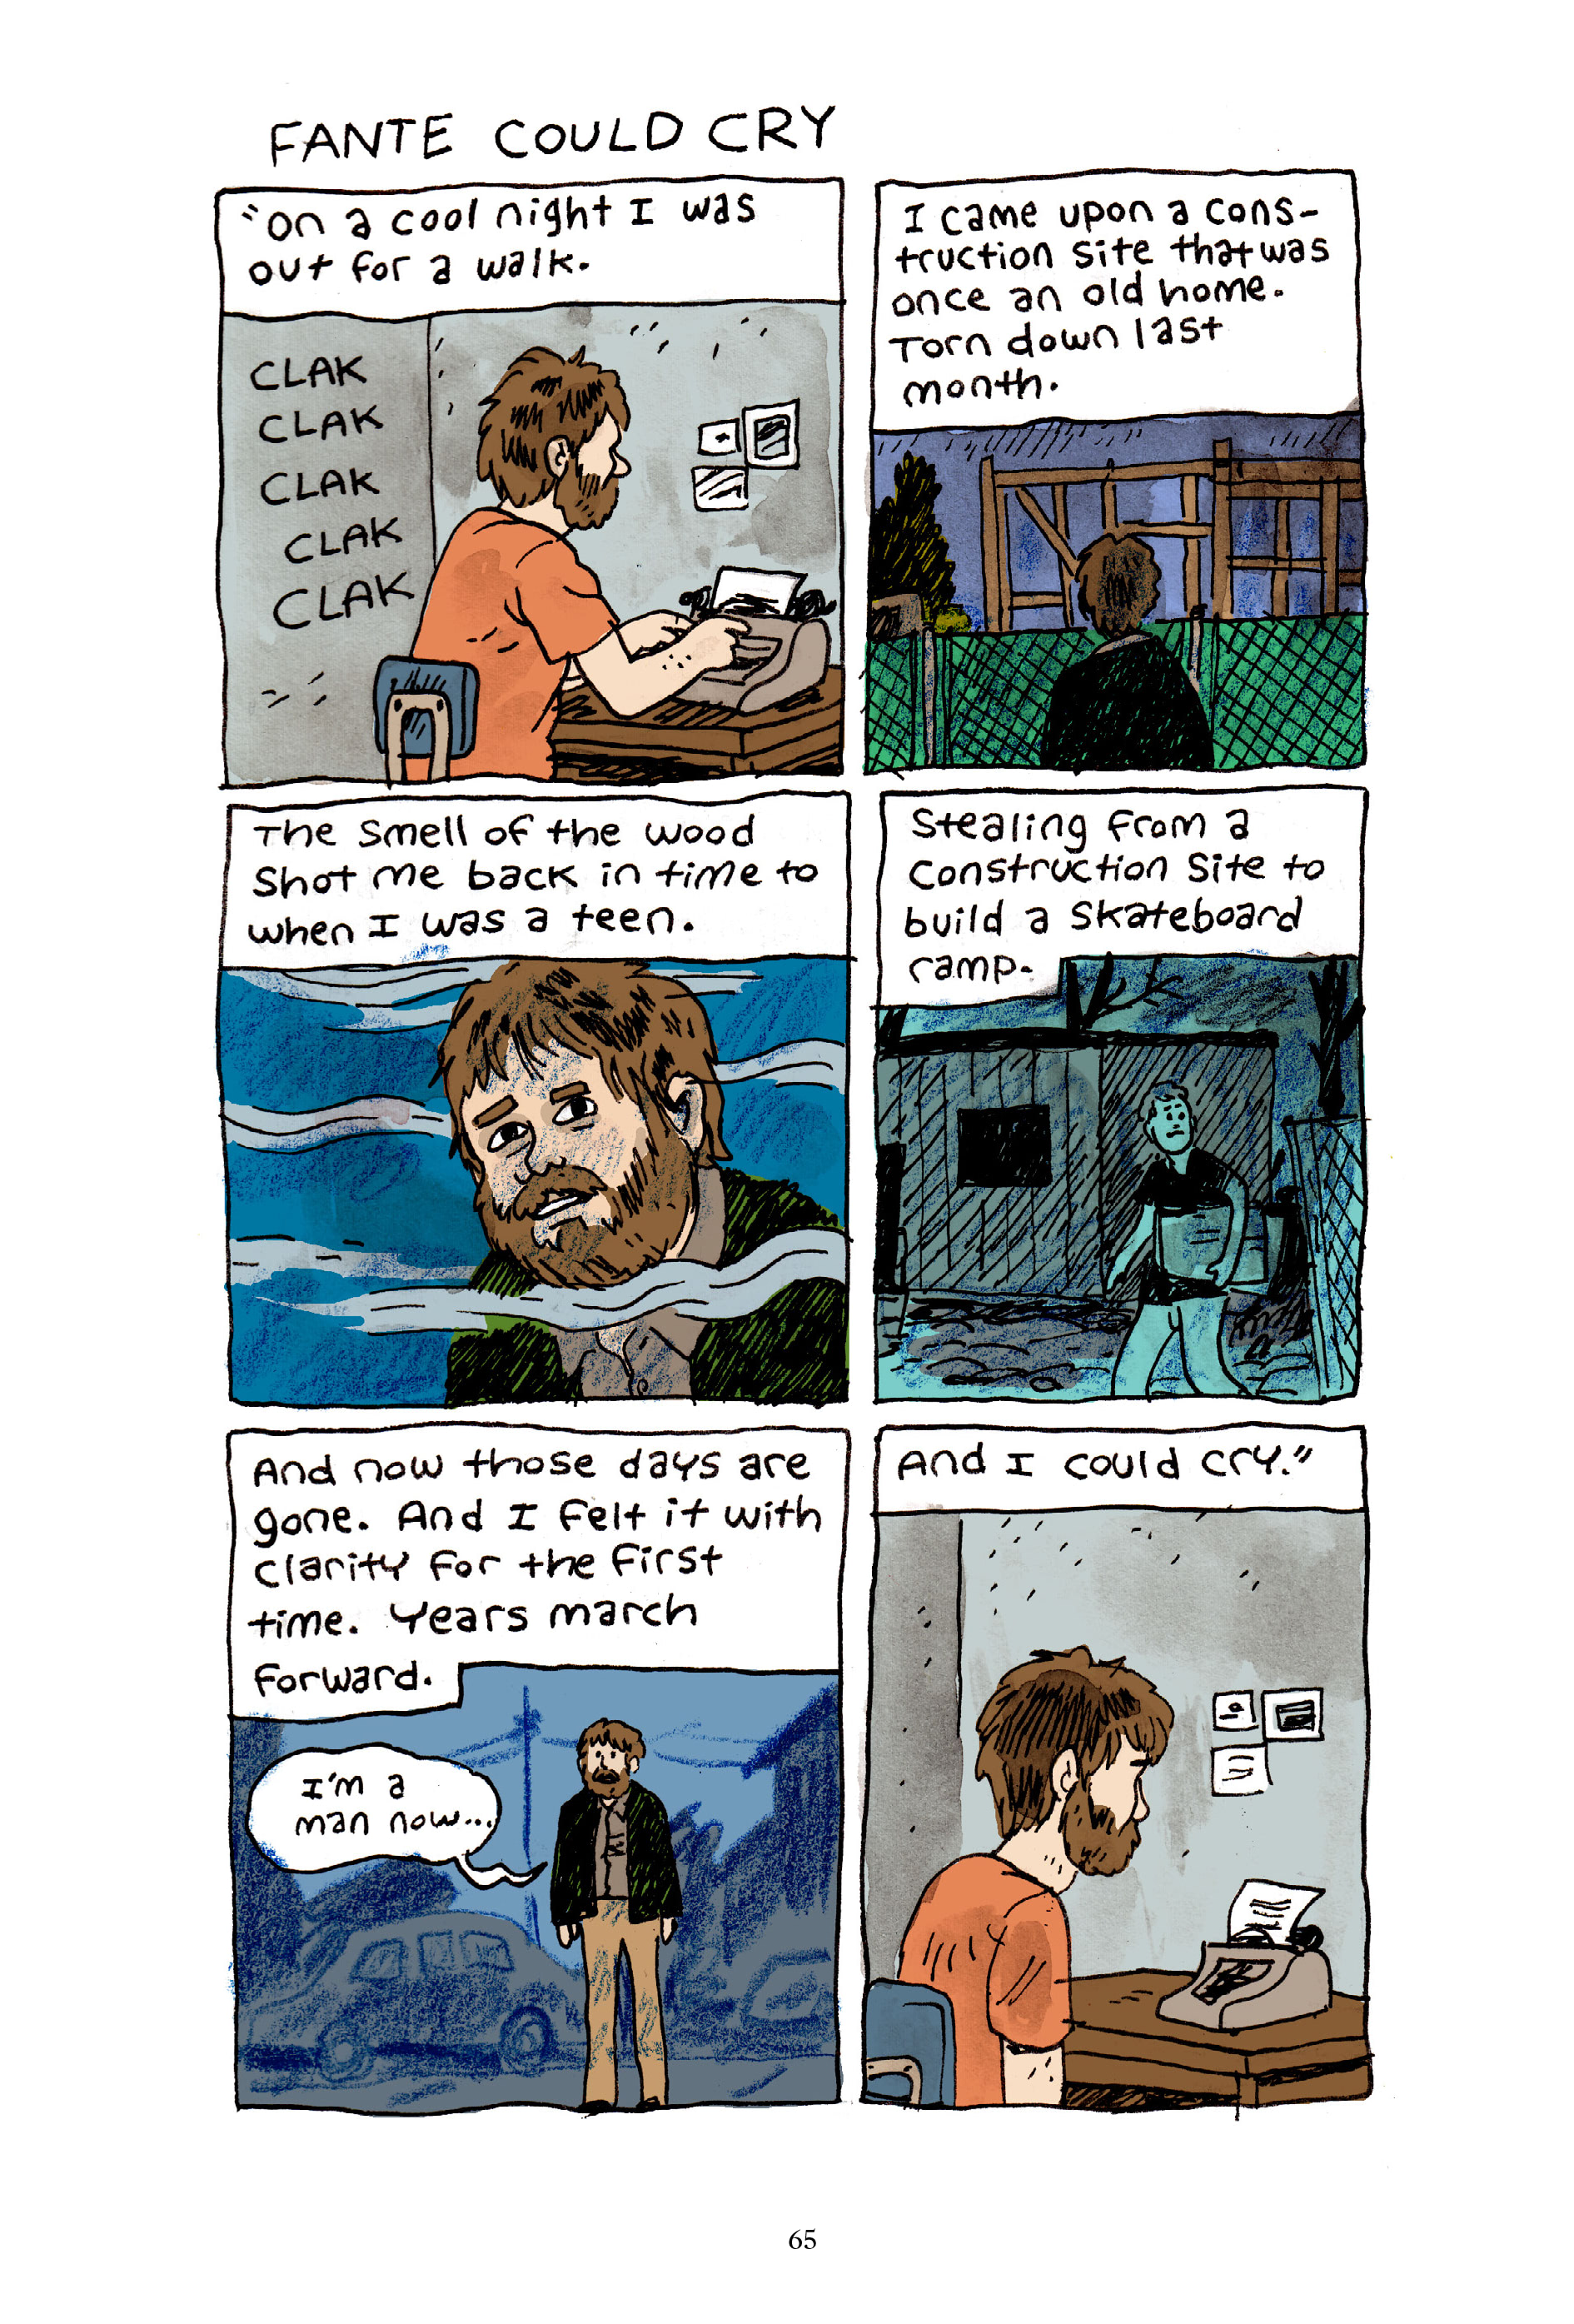 Read online The Complete Works of Fante Bukowski comic -  Issue # TPB (Part 1) - 64